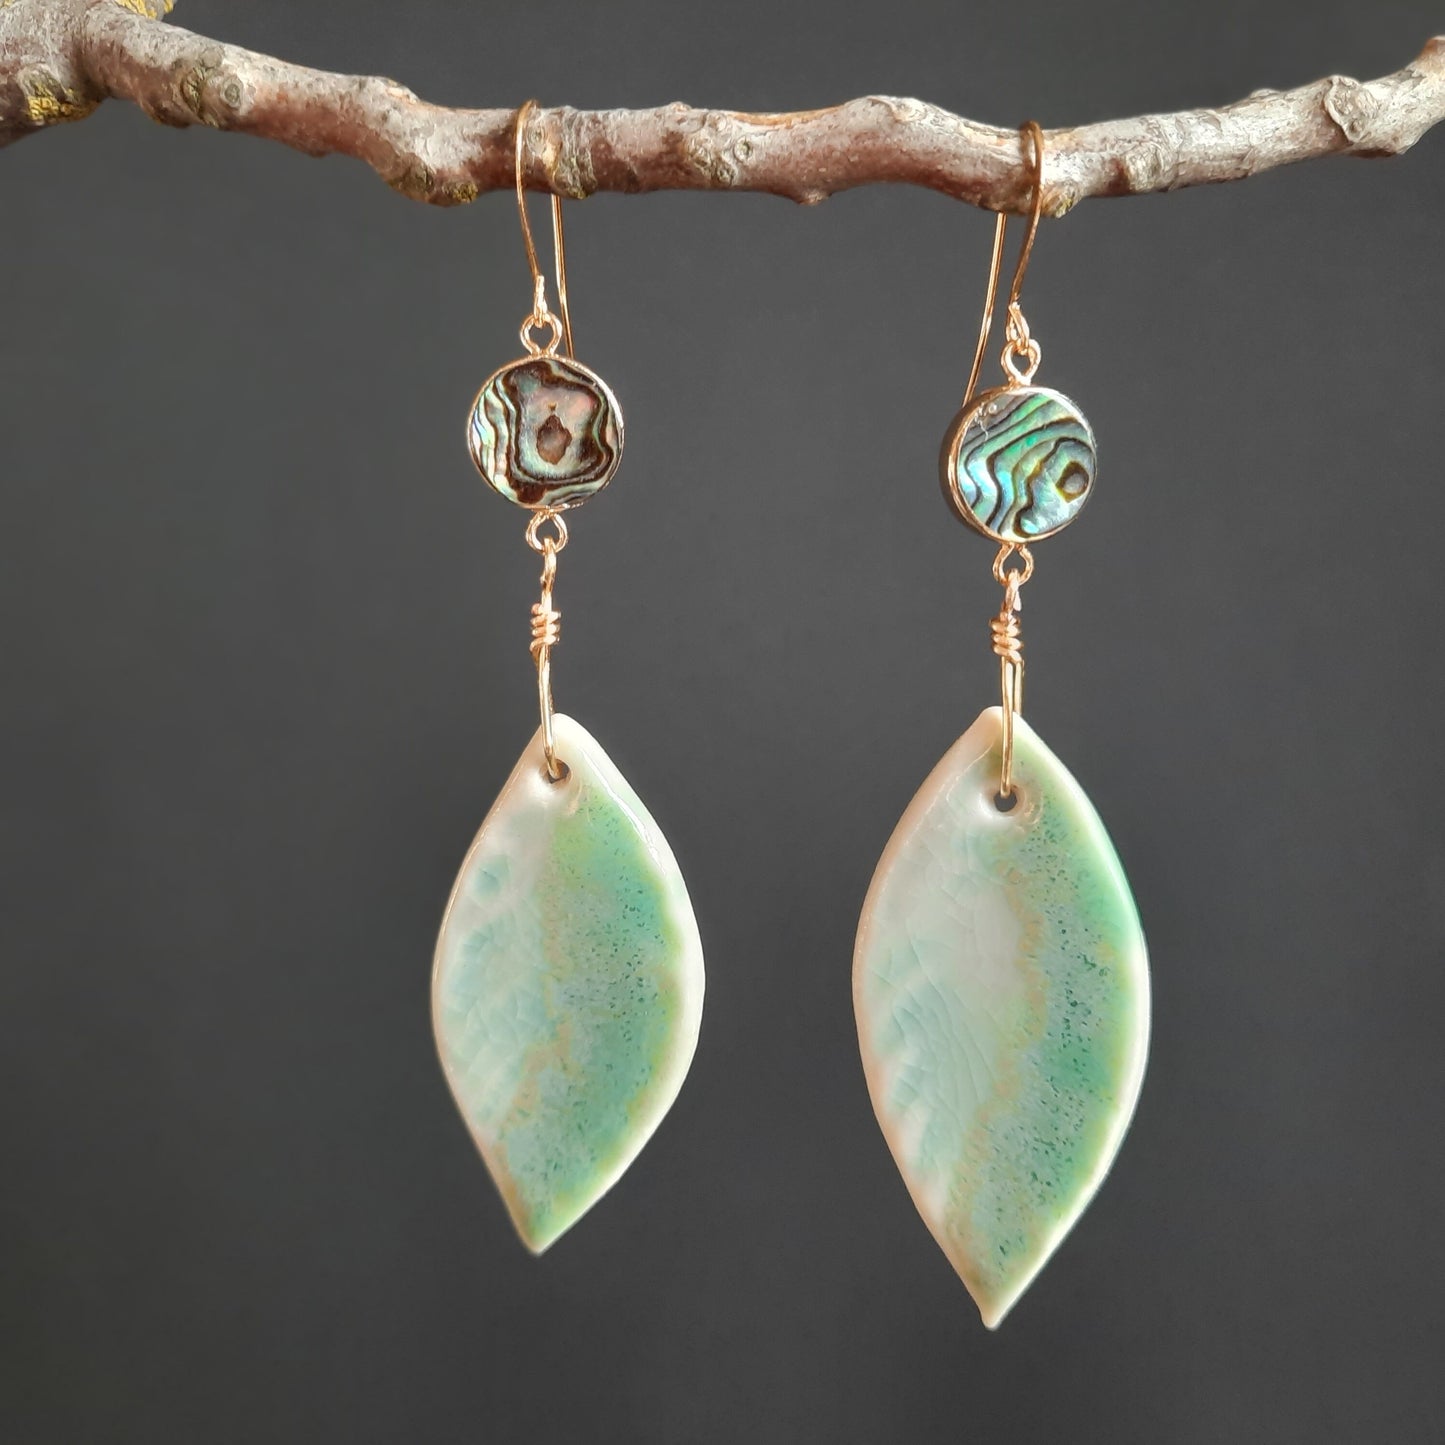 JADE-GREEN LEAF Earrings- Porcelain with Abalone, Gold focal : Handmade, One of a kind.